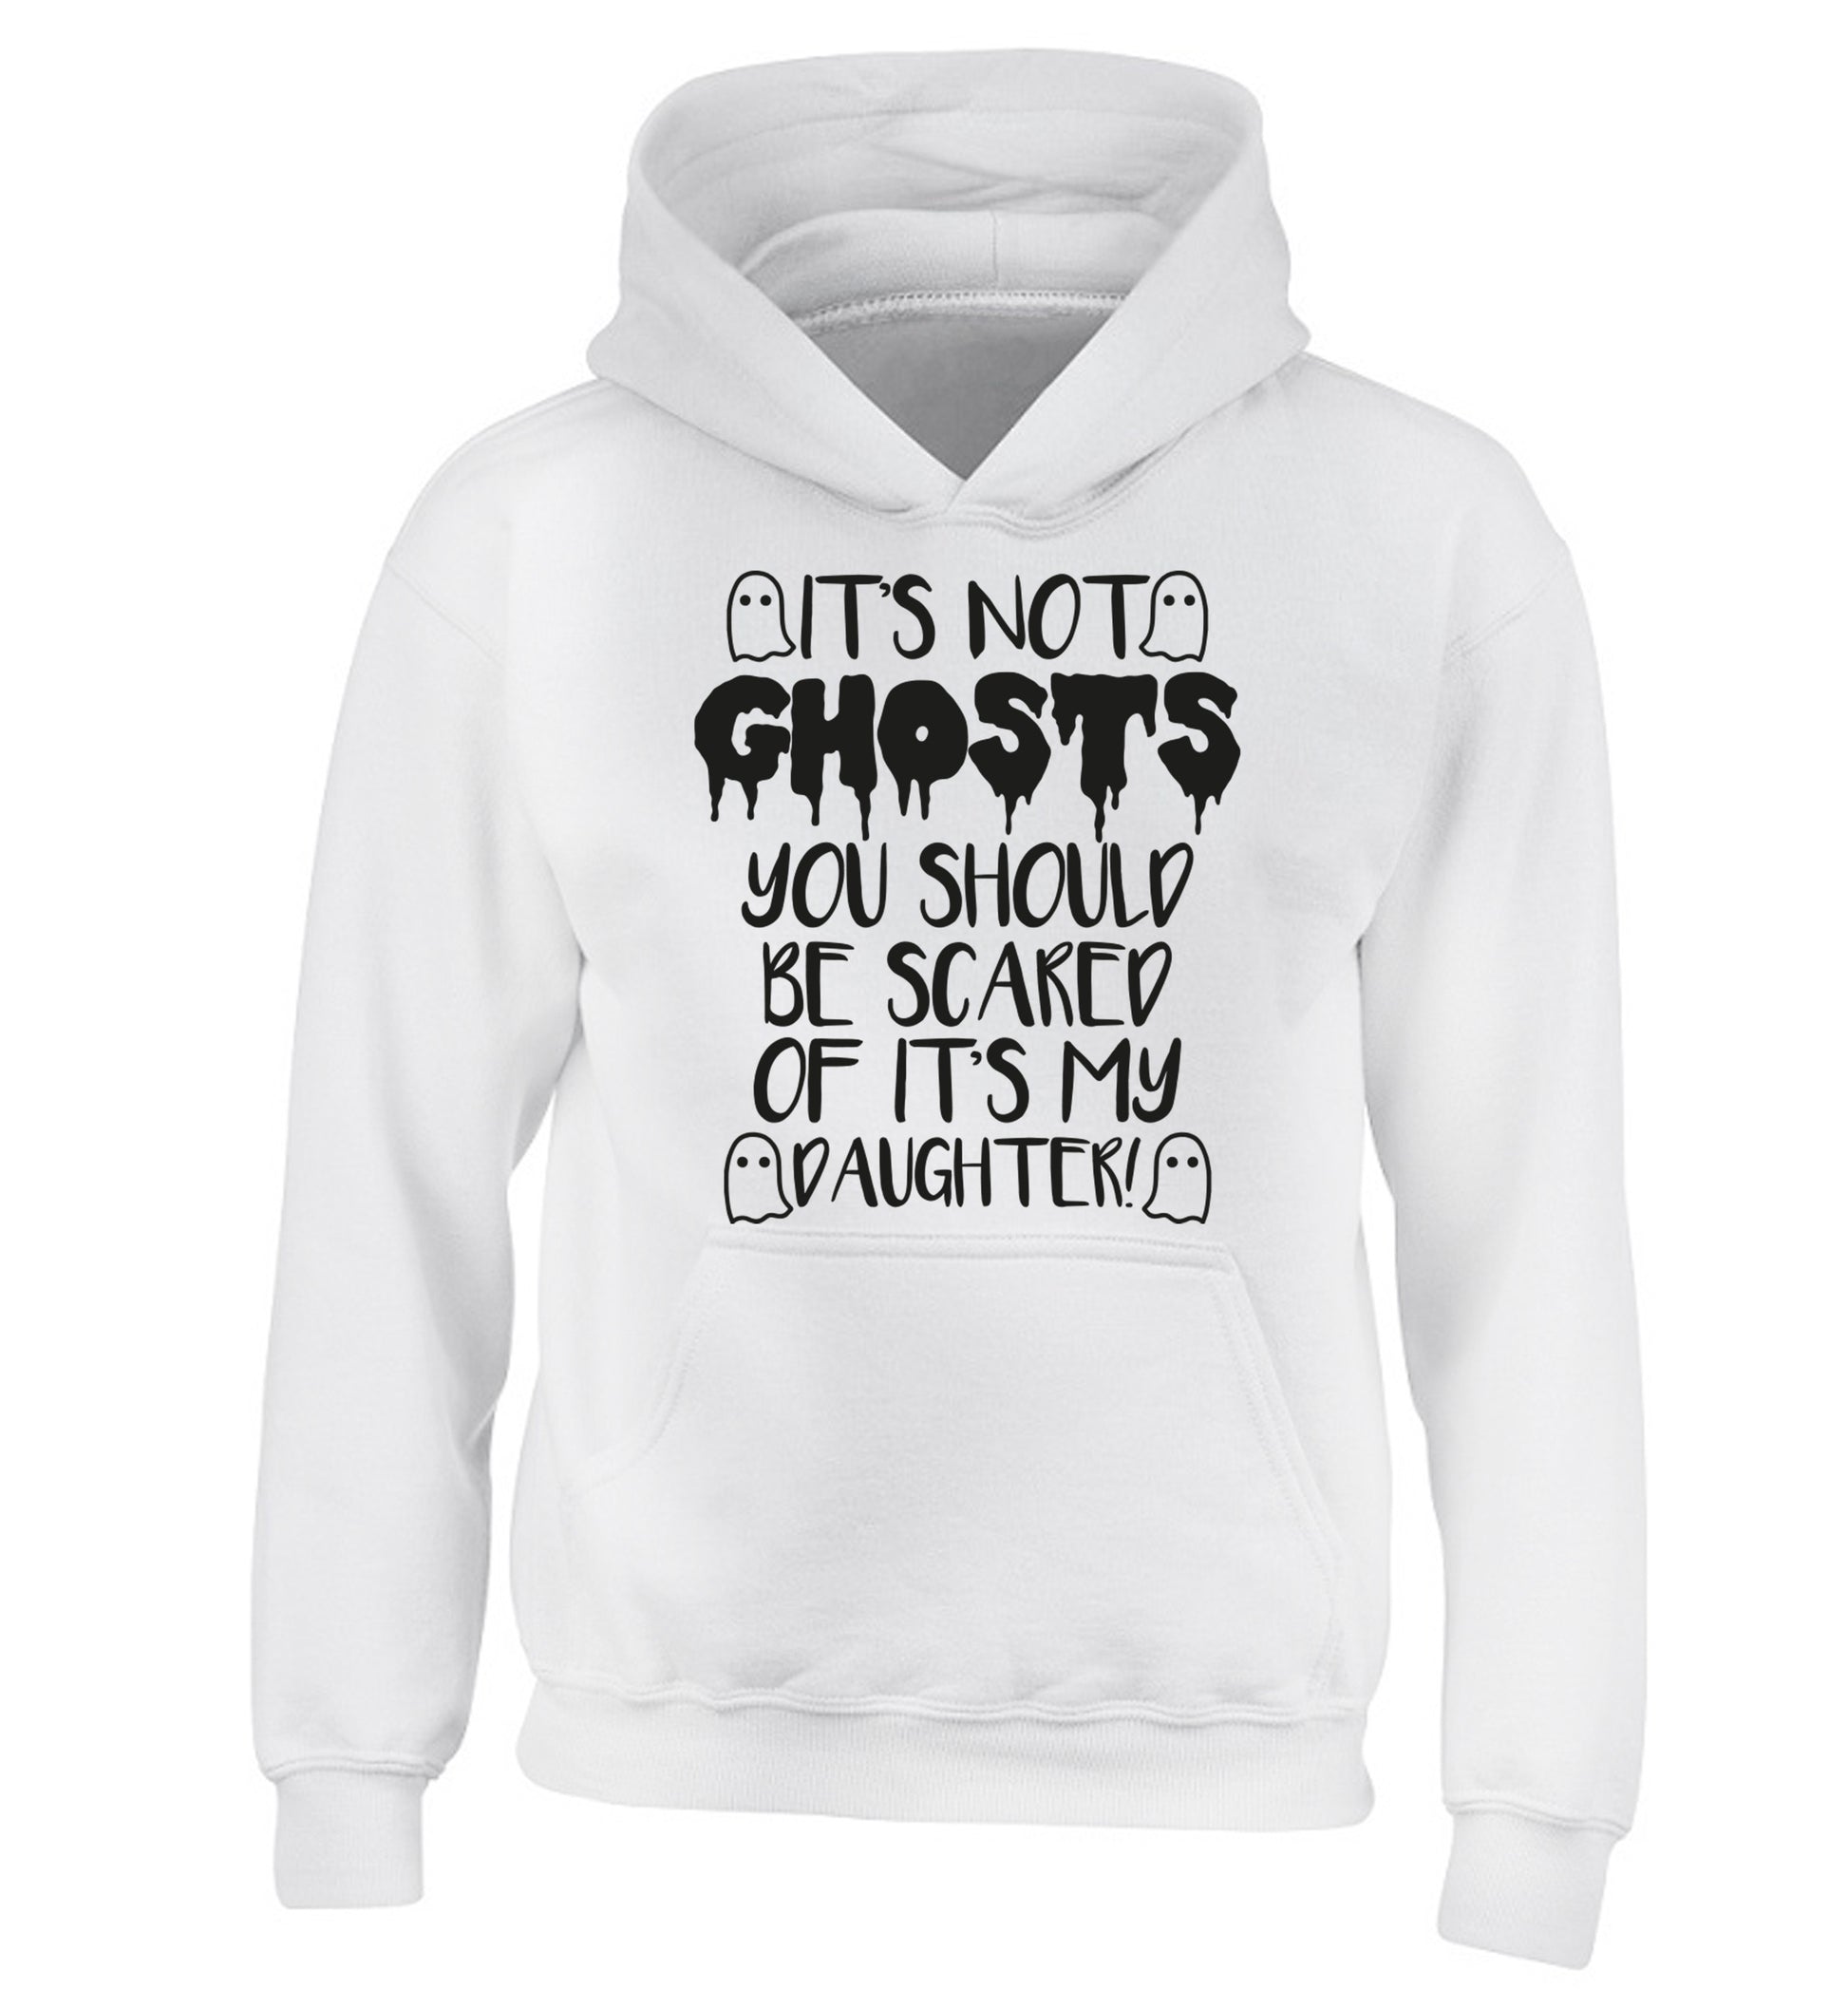 It's not ghosts you should be scared of it's my daughter! children's white hoodie 12-14 Years